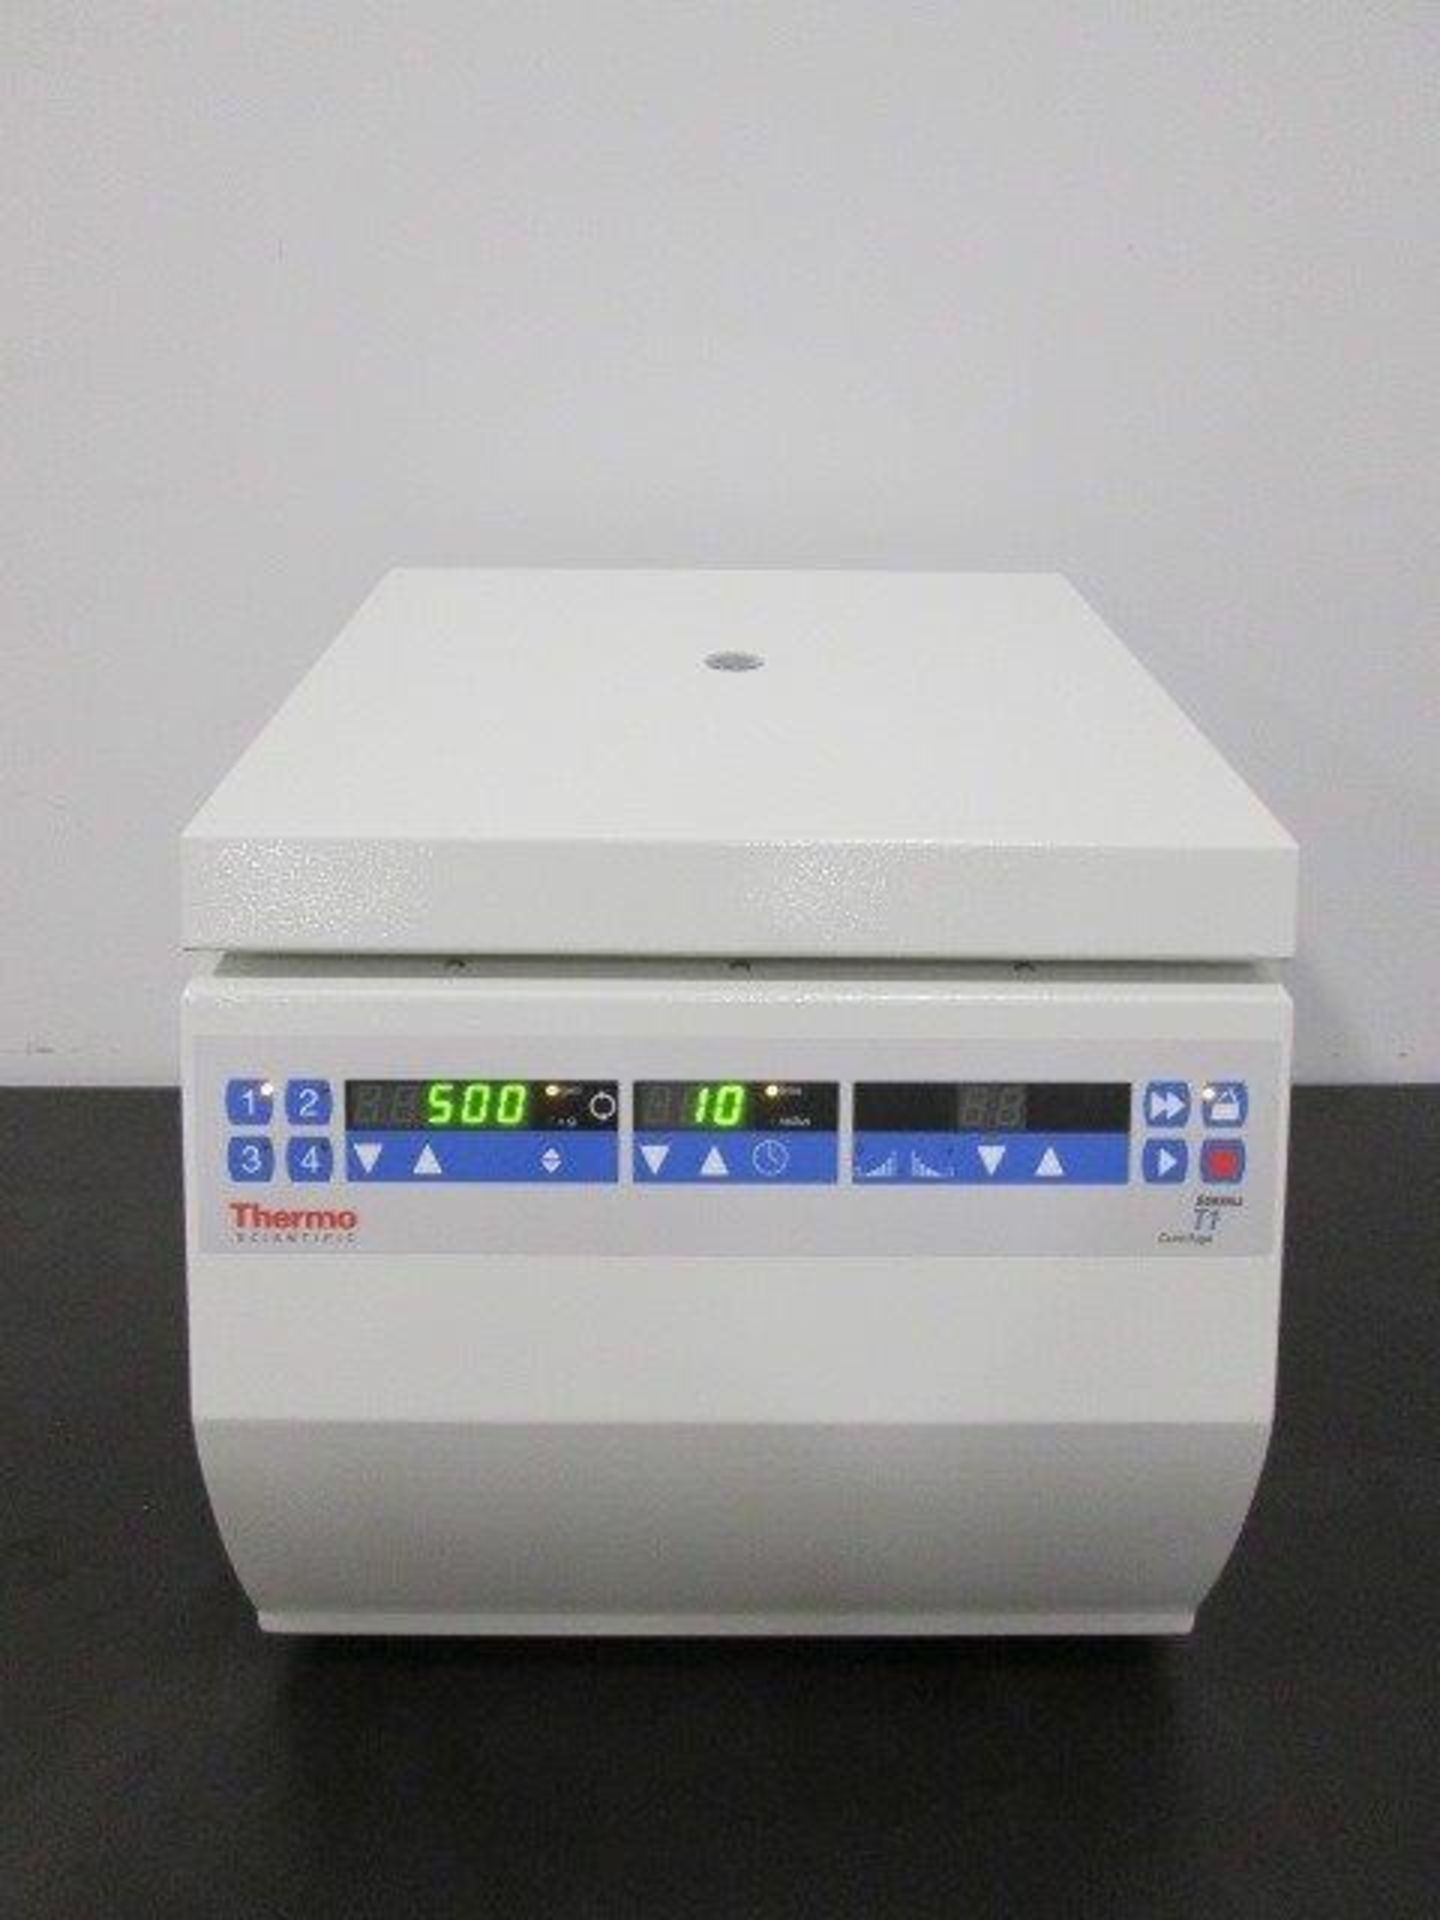 Thermo Scientific Sorvall T1 Centrifuge, Refurbished - Image 3 of 3